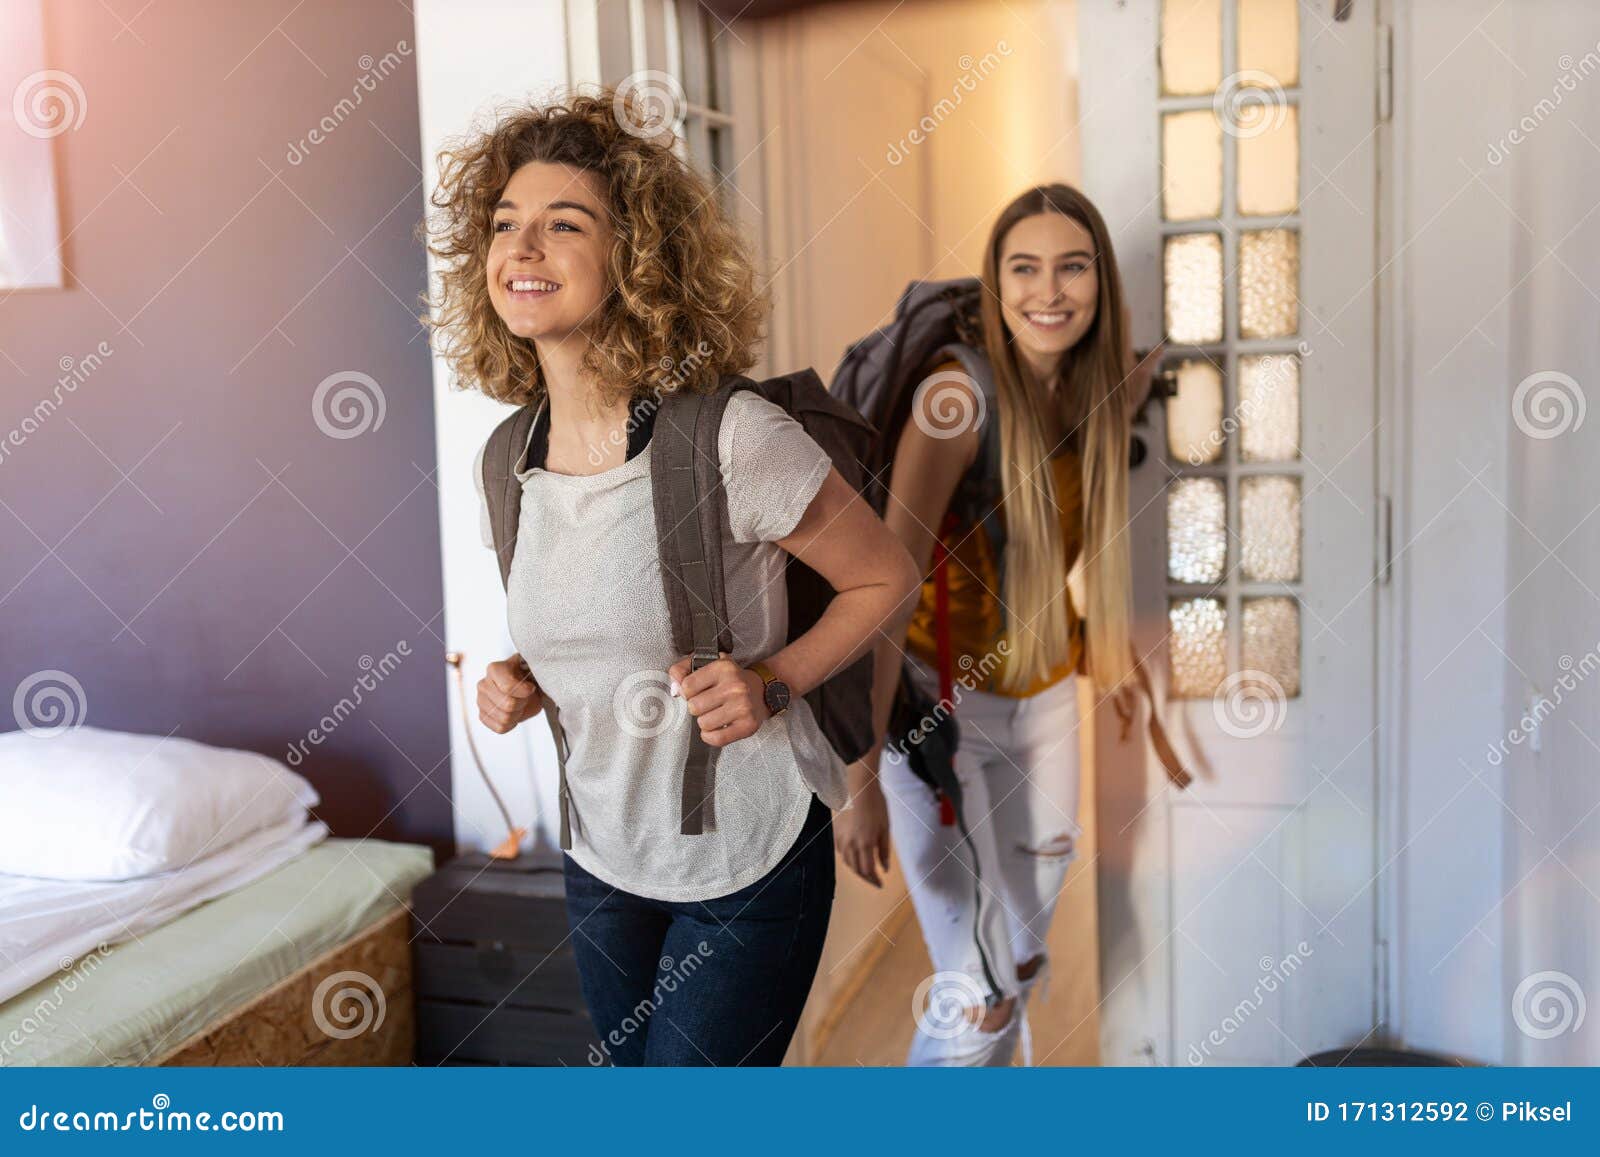 young female tourists staying in youth hostel